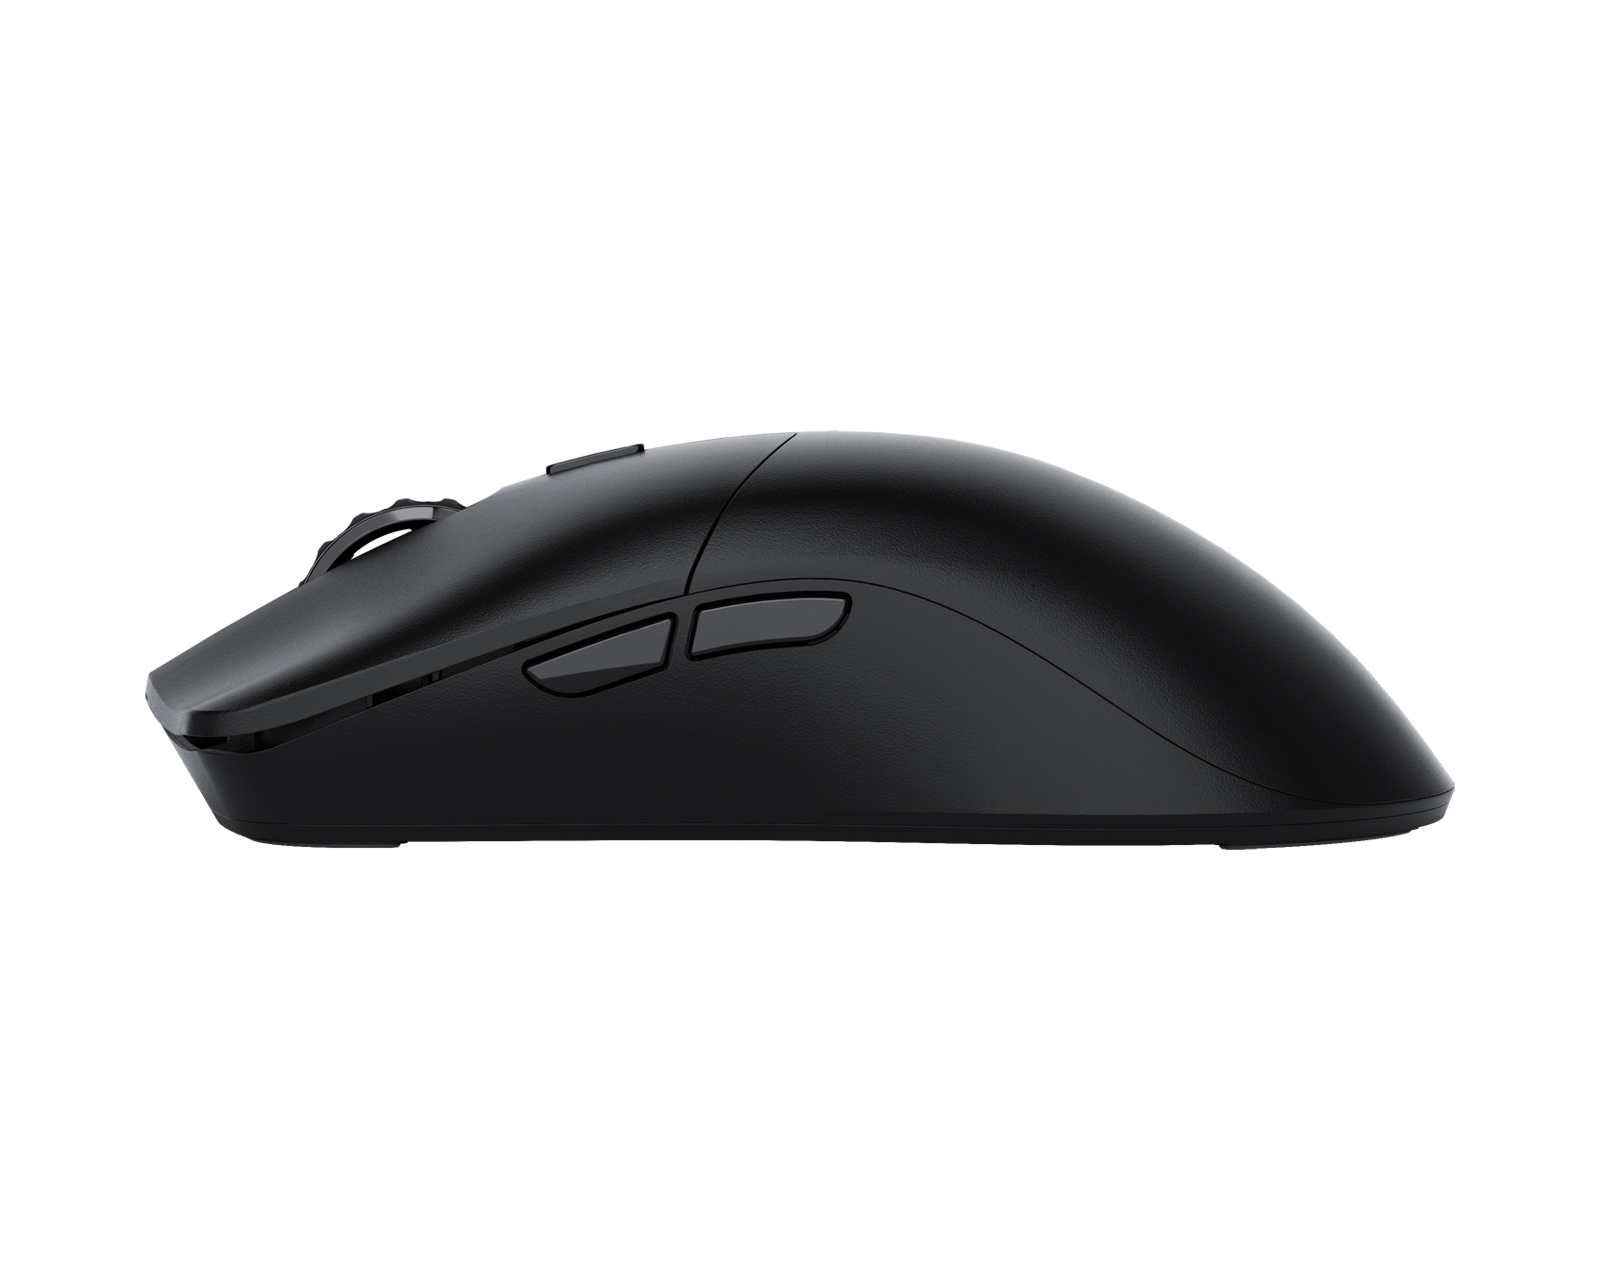 Glorious Model O 2 Pro Wireless Gaming Mouse - Black - us 